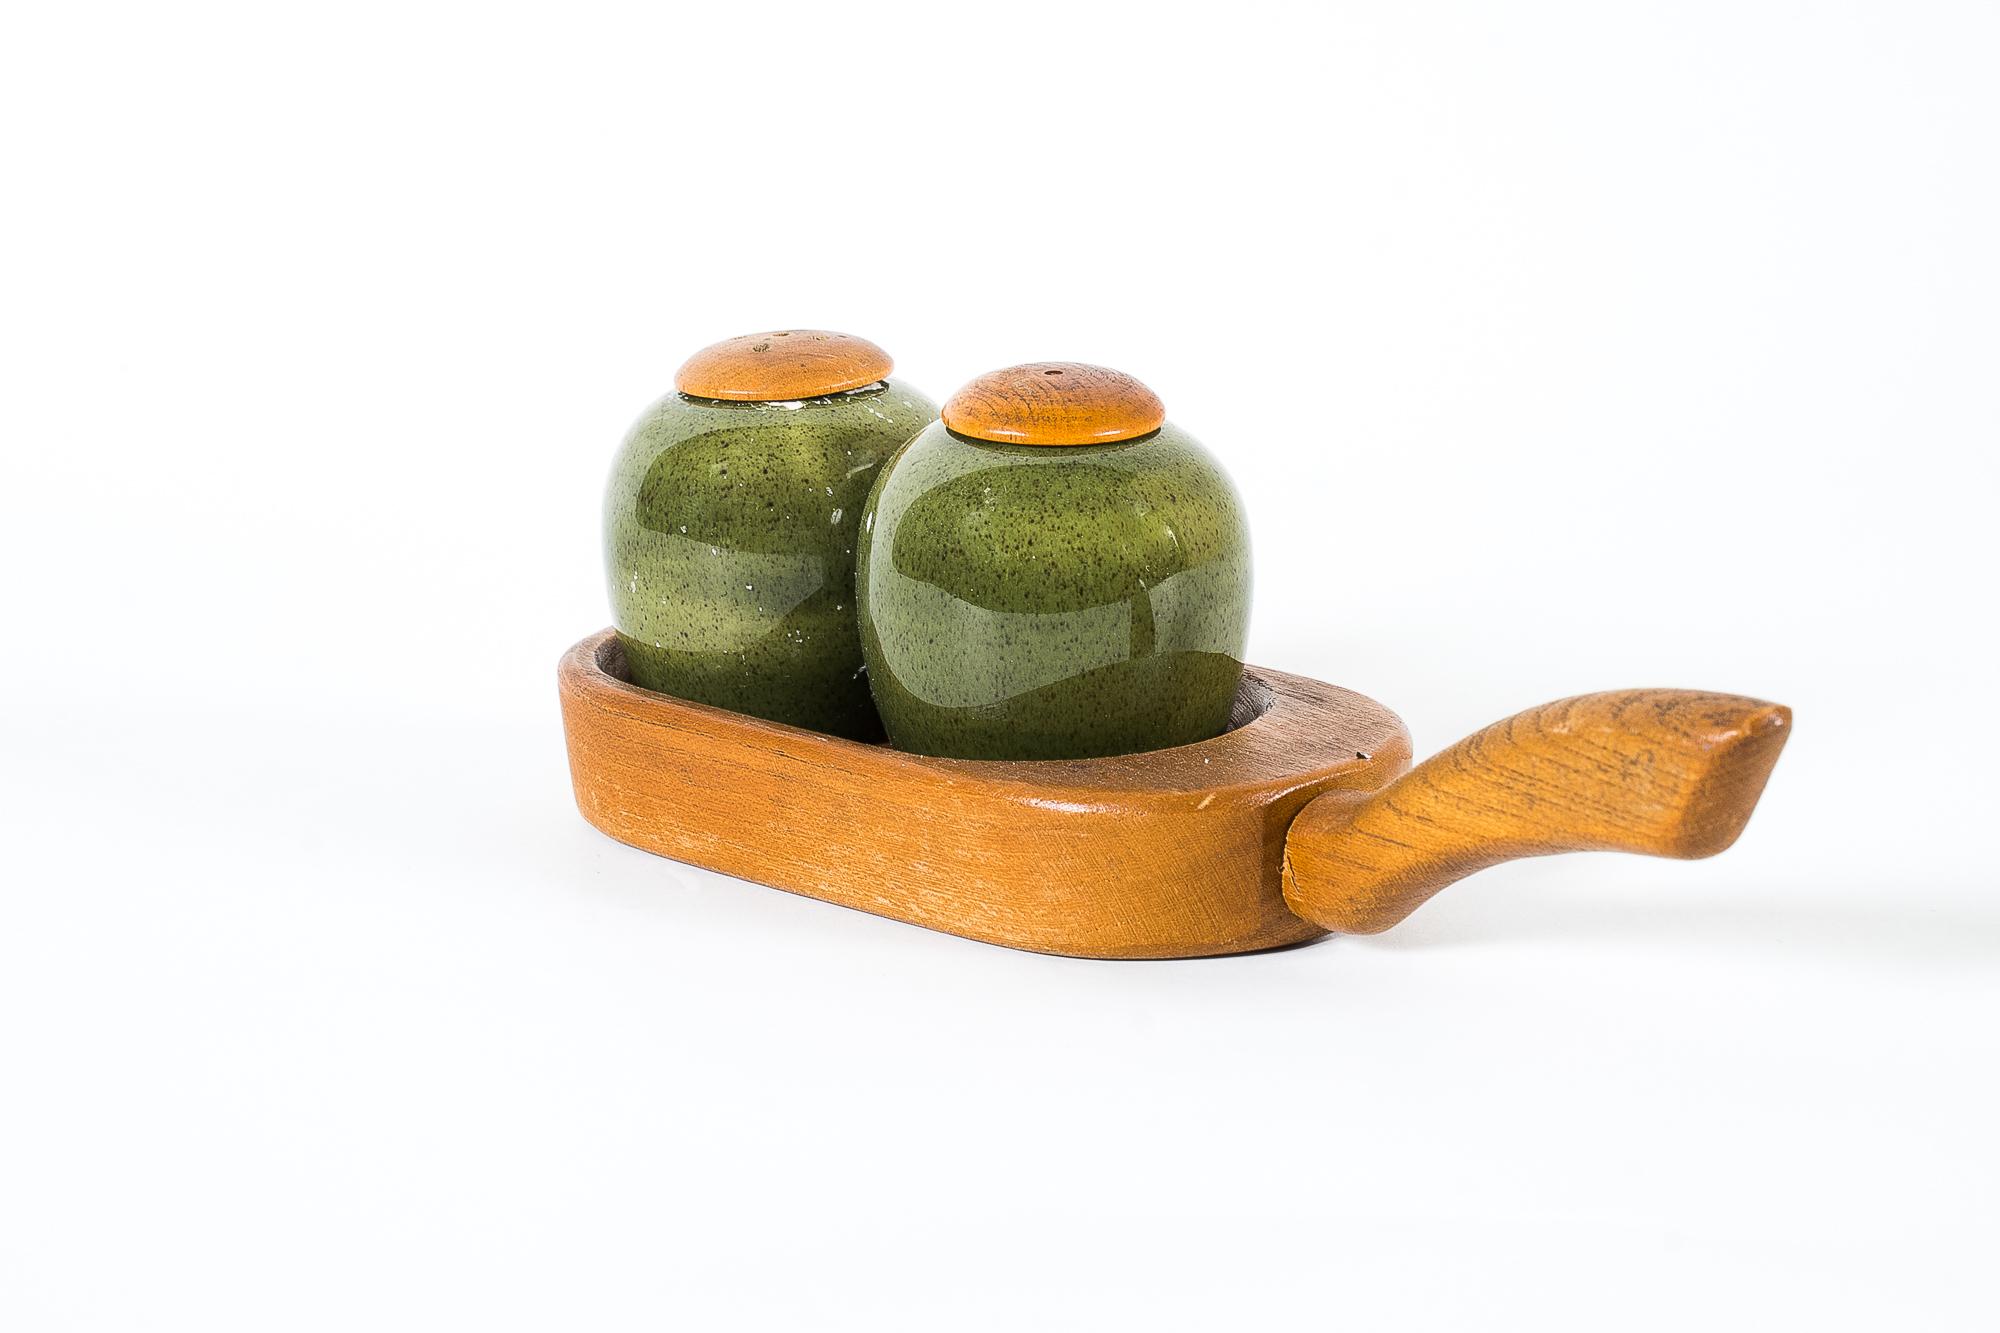 Mid-Century Modern Salt and Pepper Shaker with Stand in Teakwood and Ceramic, Around 1960s For Sale